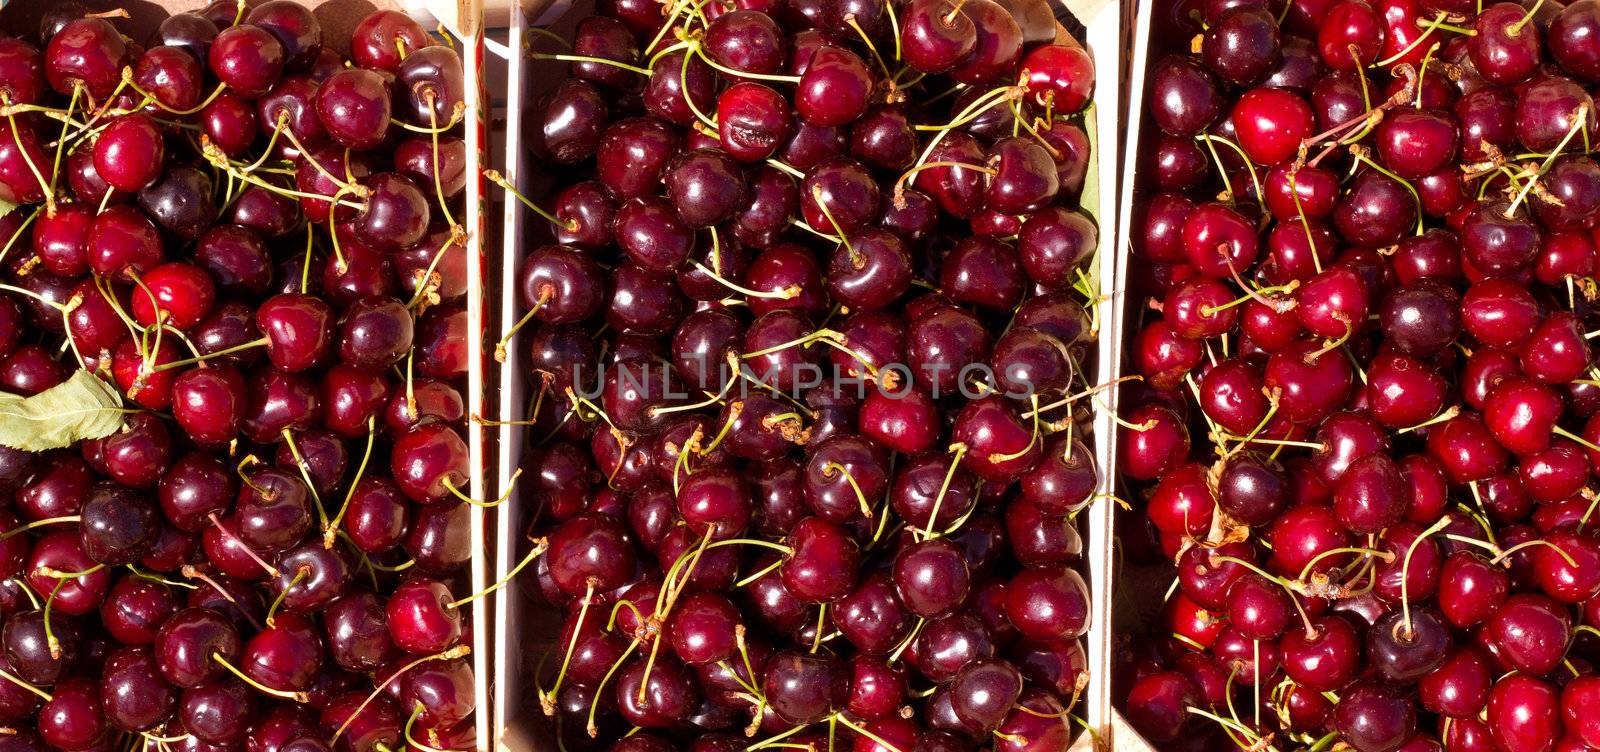 Cherry red fruits in wooden baskets by lunamarina